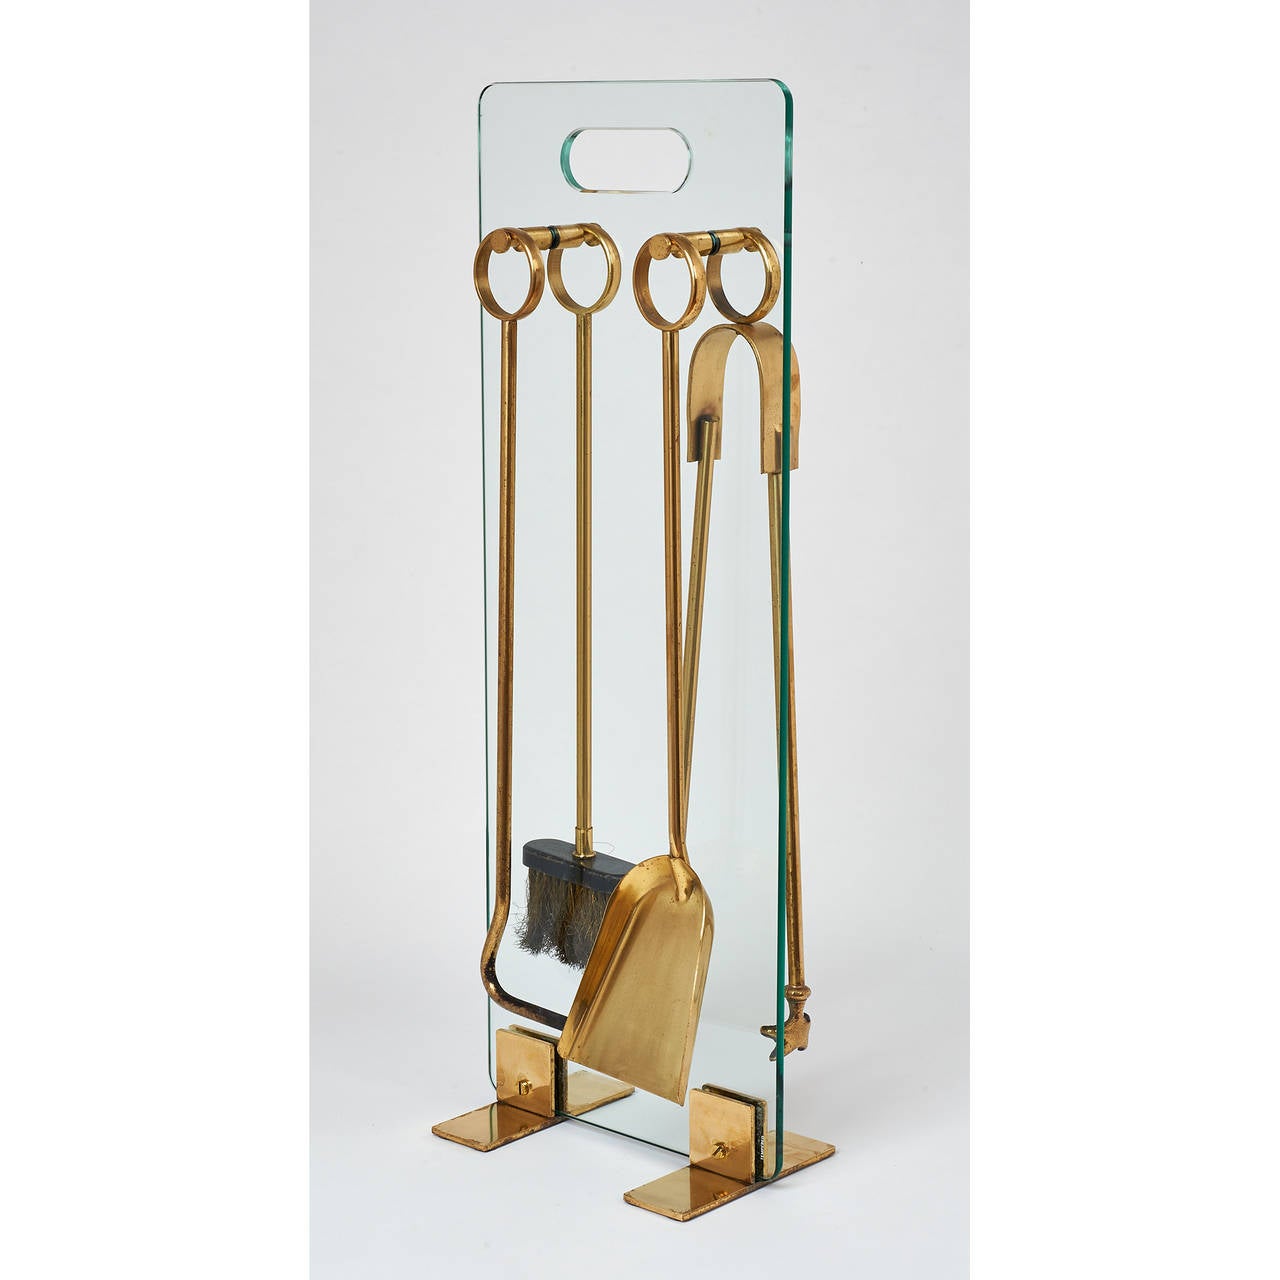 A set of four brass fireplace tools
mounted on a glass panel with inset handle and bronze feet,

France, 1970s.

Measure: 10 x 26 x 6 D.